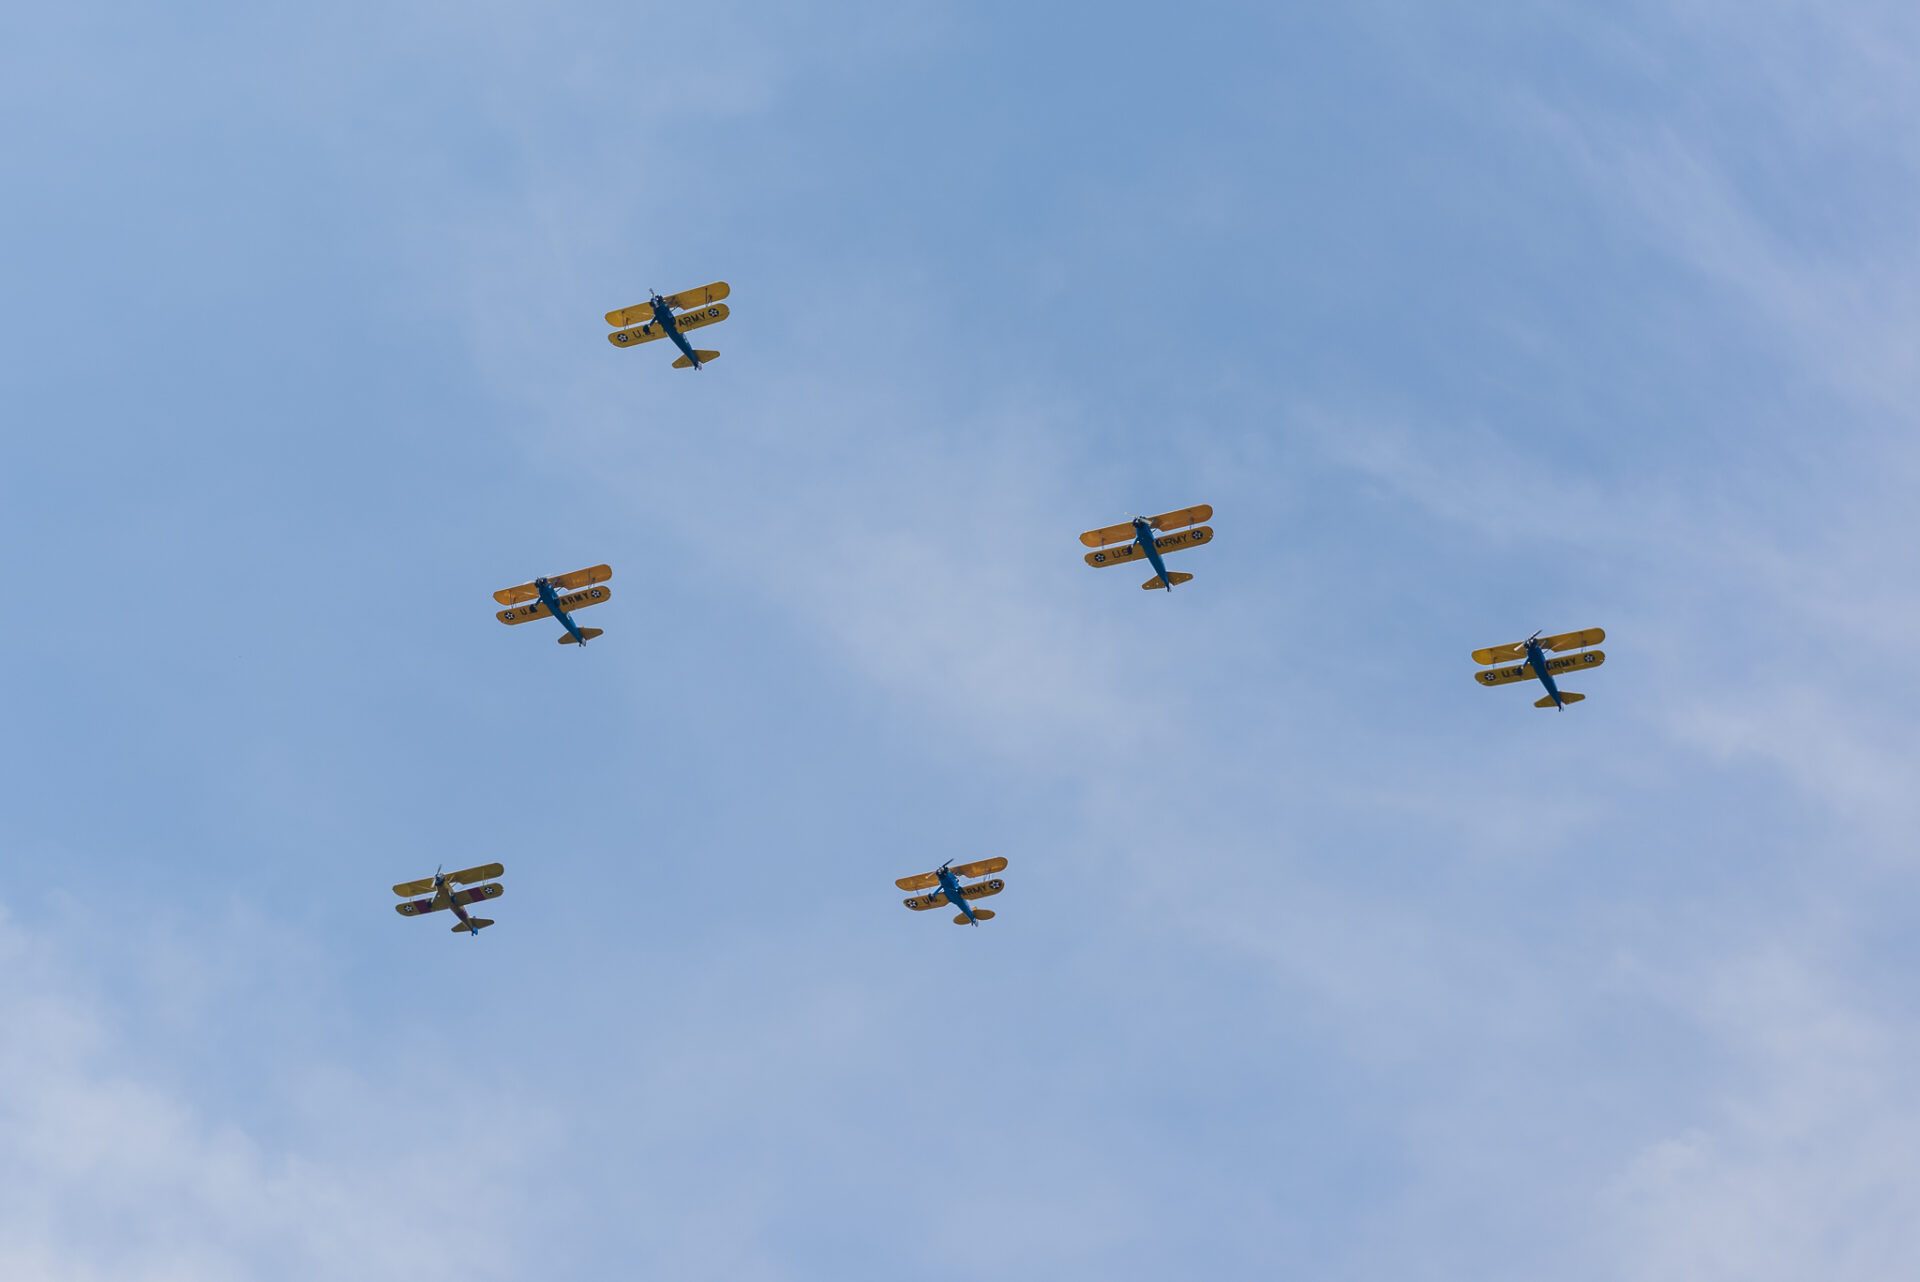 Arsenal of Democracy Flyover trainer formation